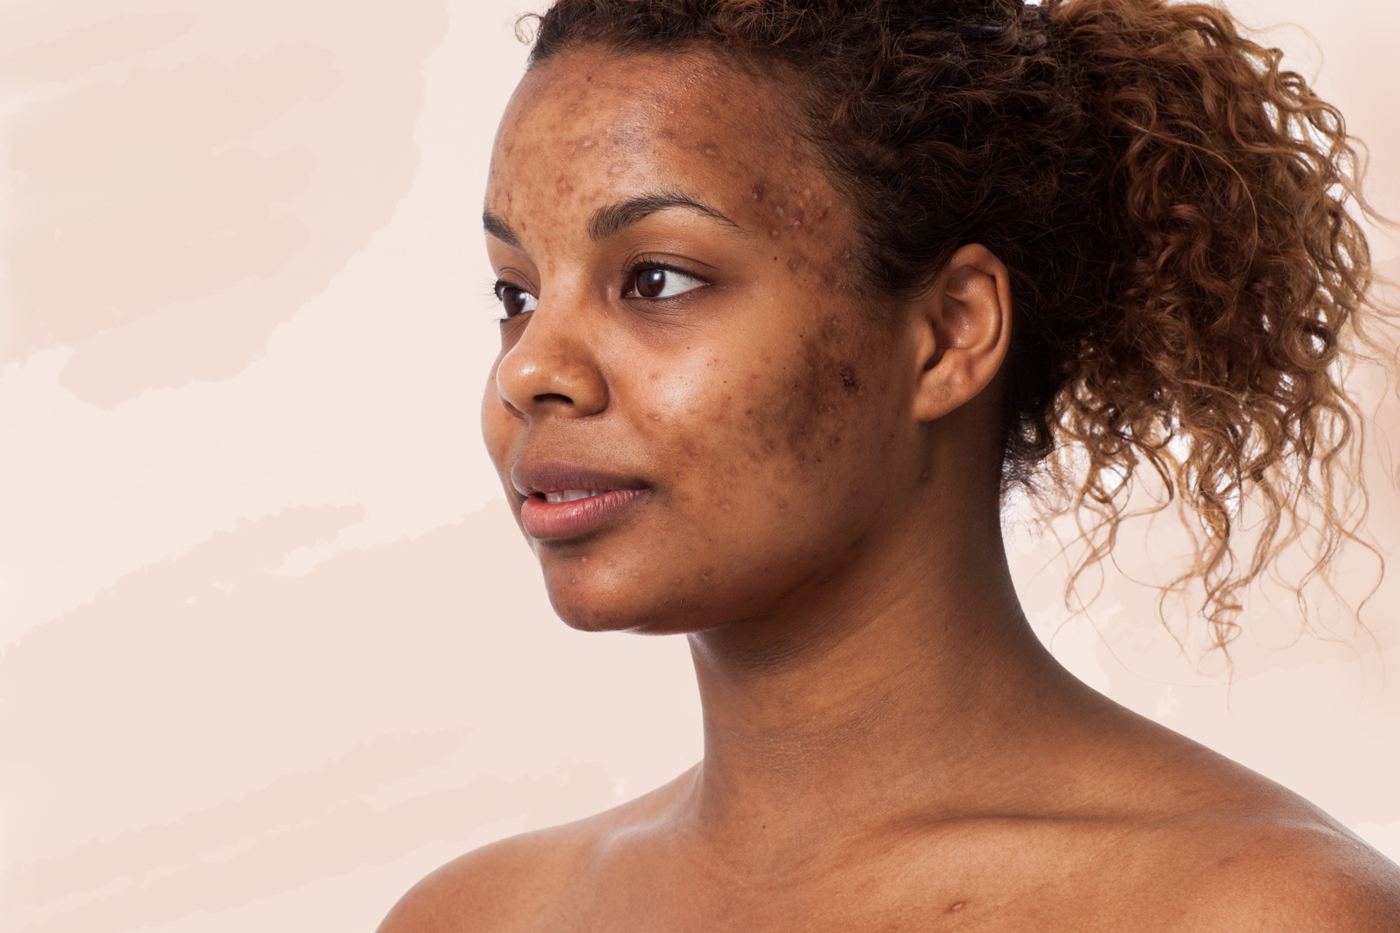 6 ultimate hacks to acne facial scars naturally